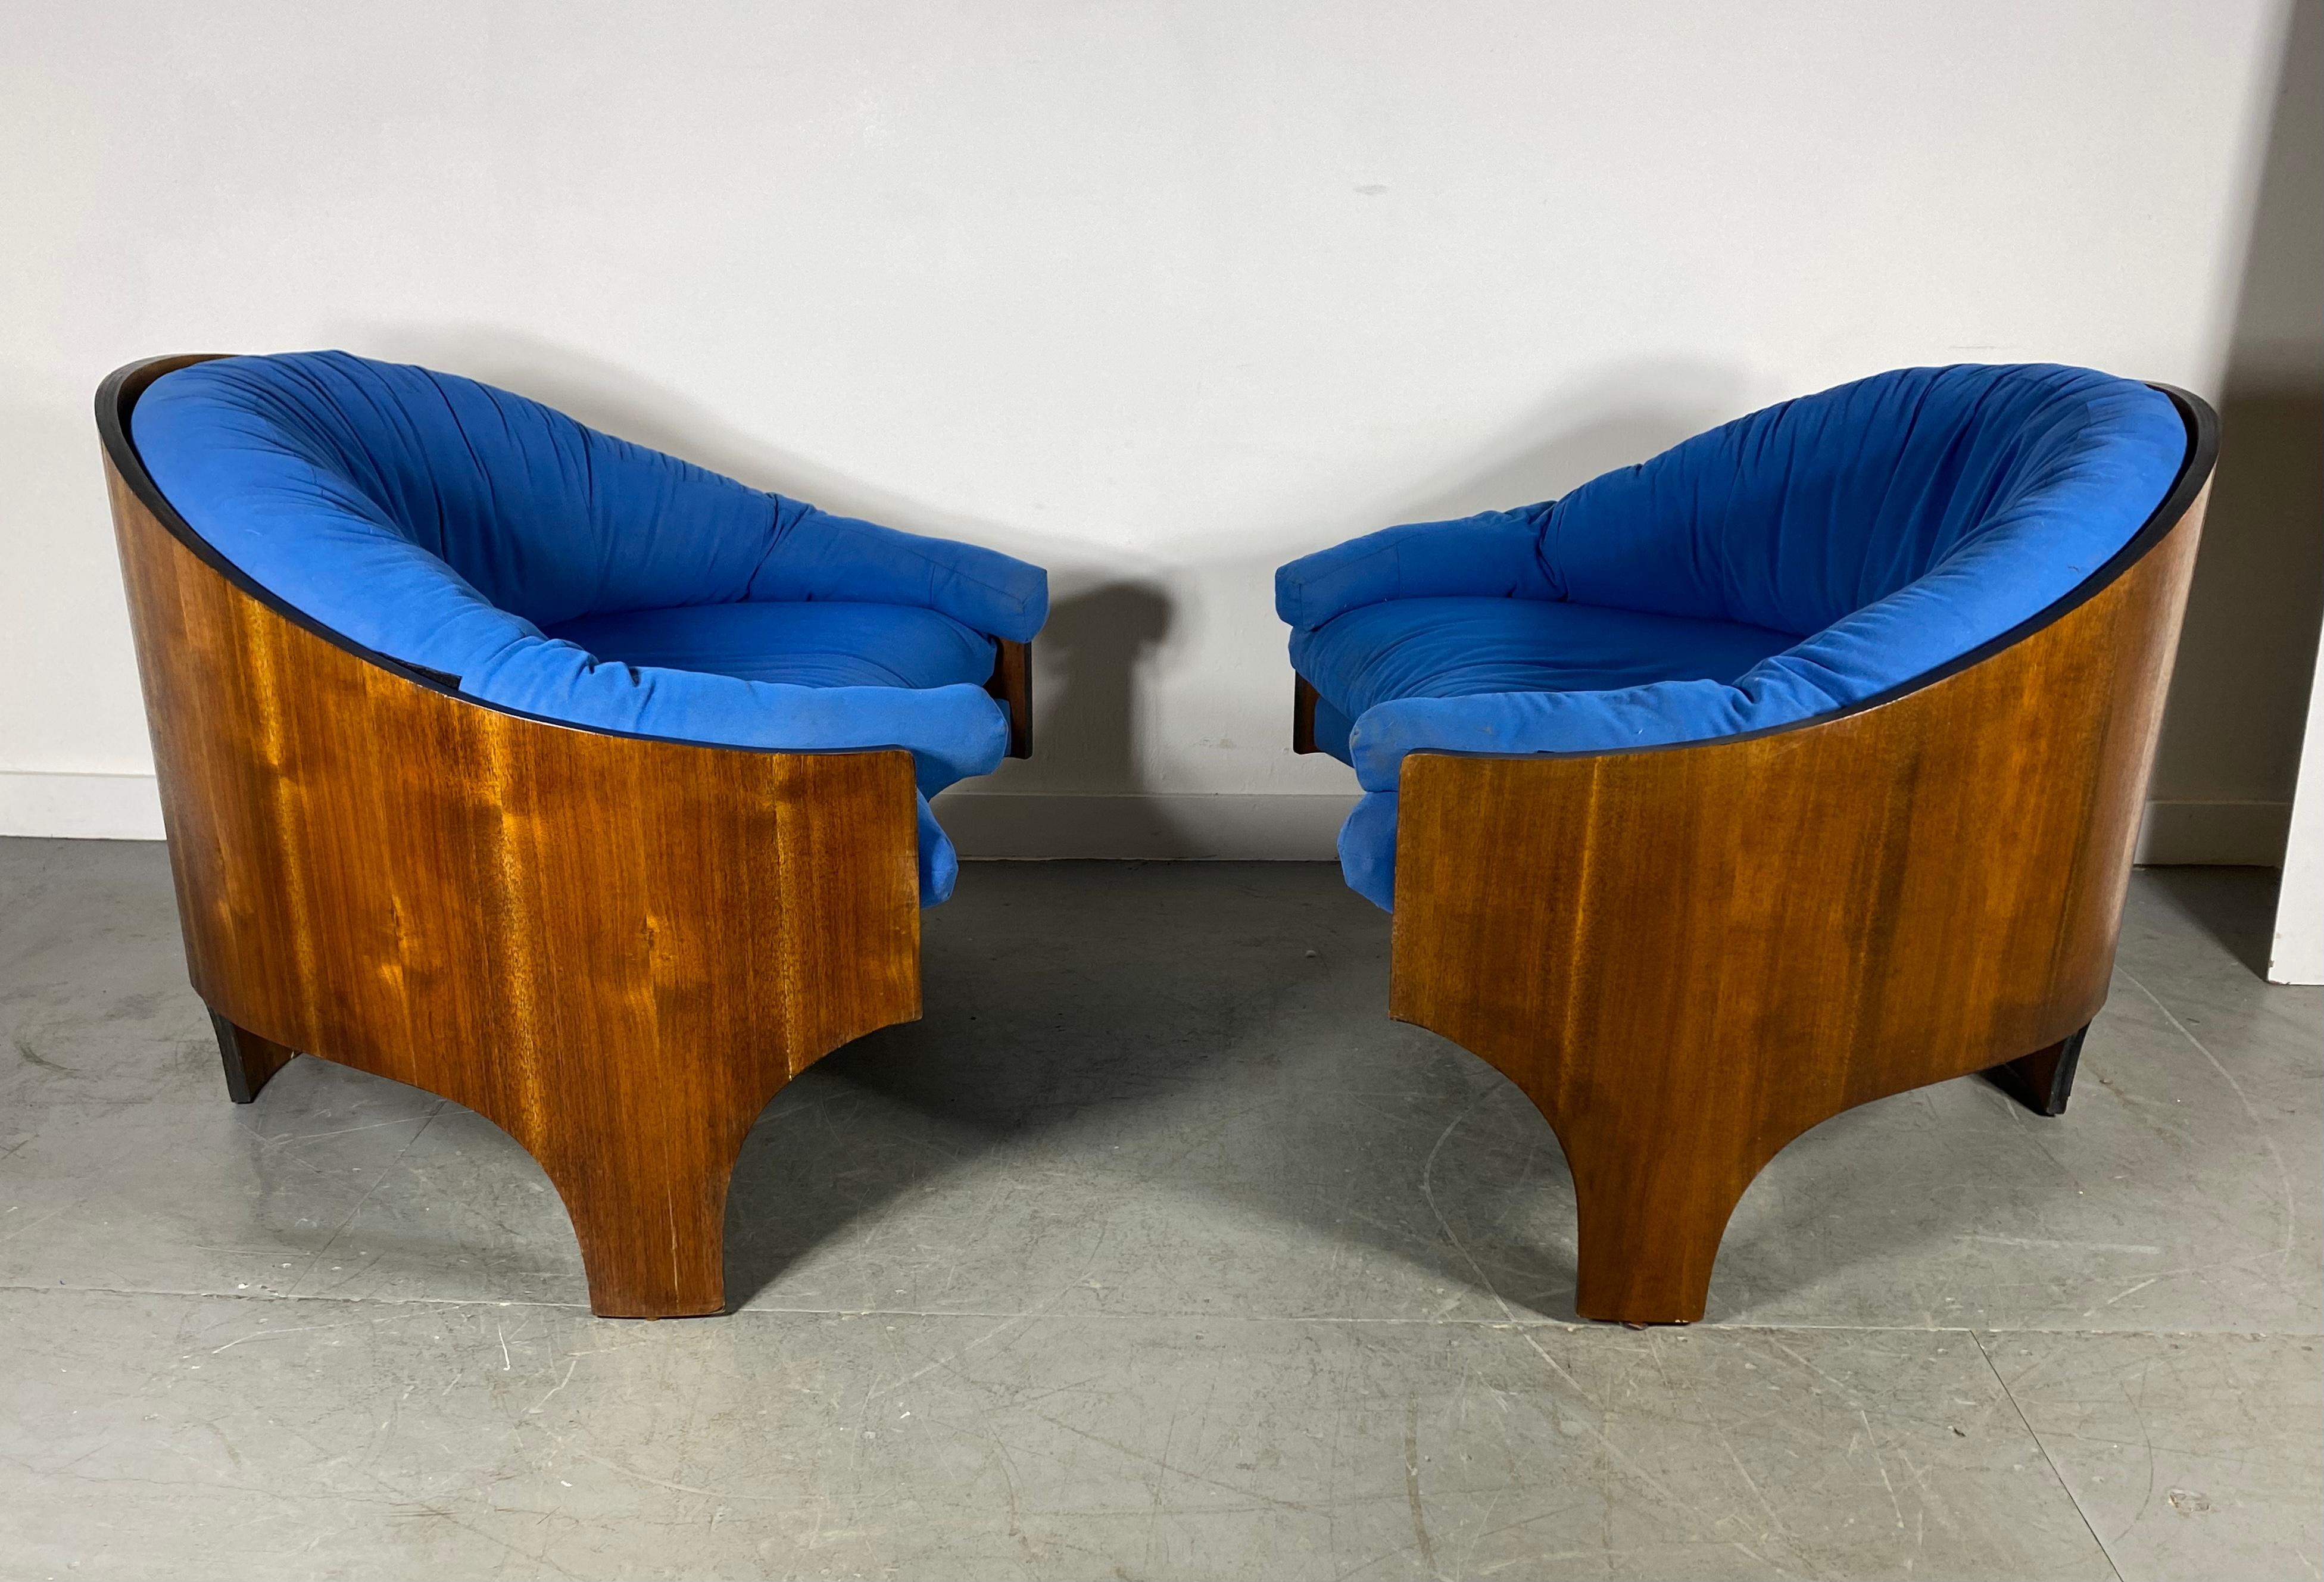 Henry Glass Intimate Island Lounge Chairs Stunning Moulded Walnut For Sale 4